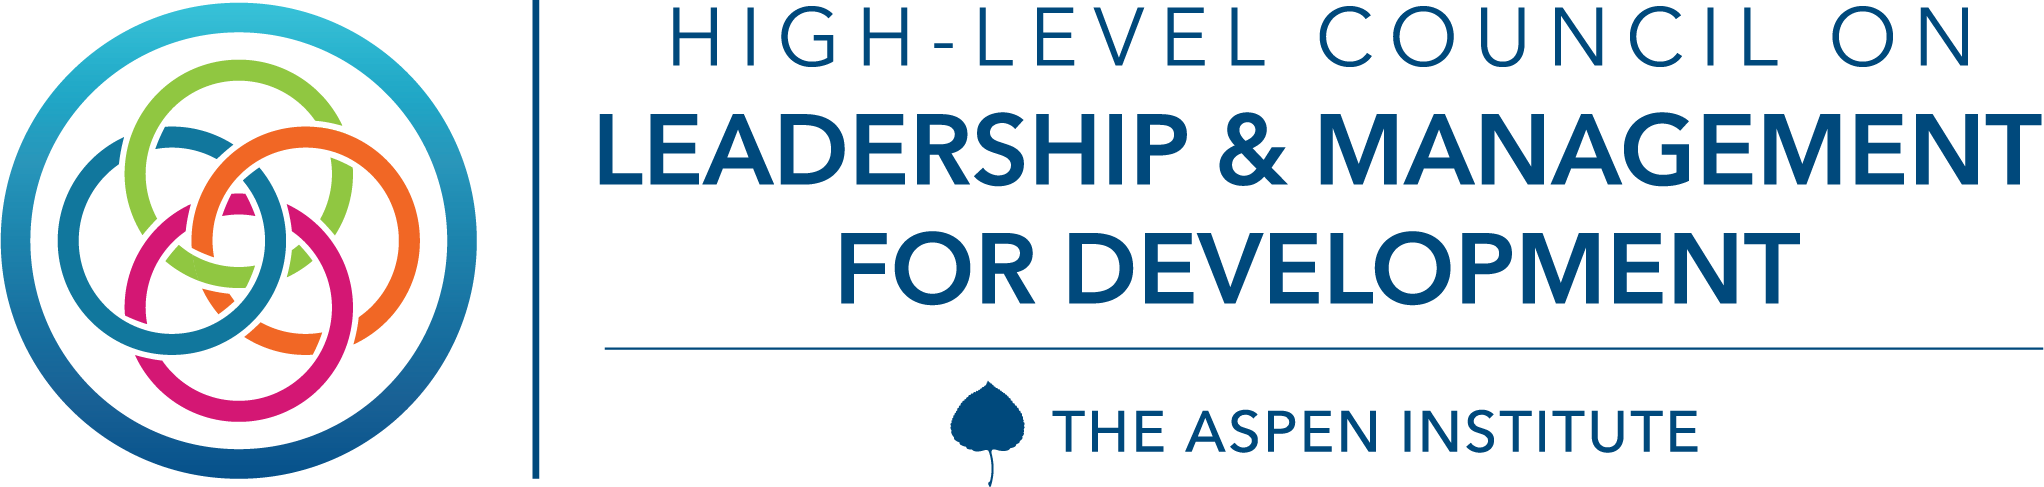 High-Level Council on Leadership &amp; Management for Development